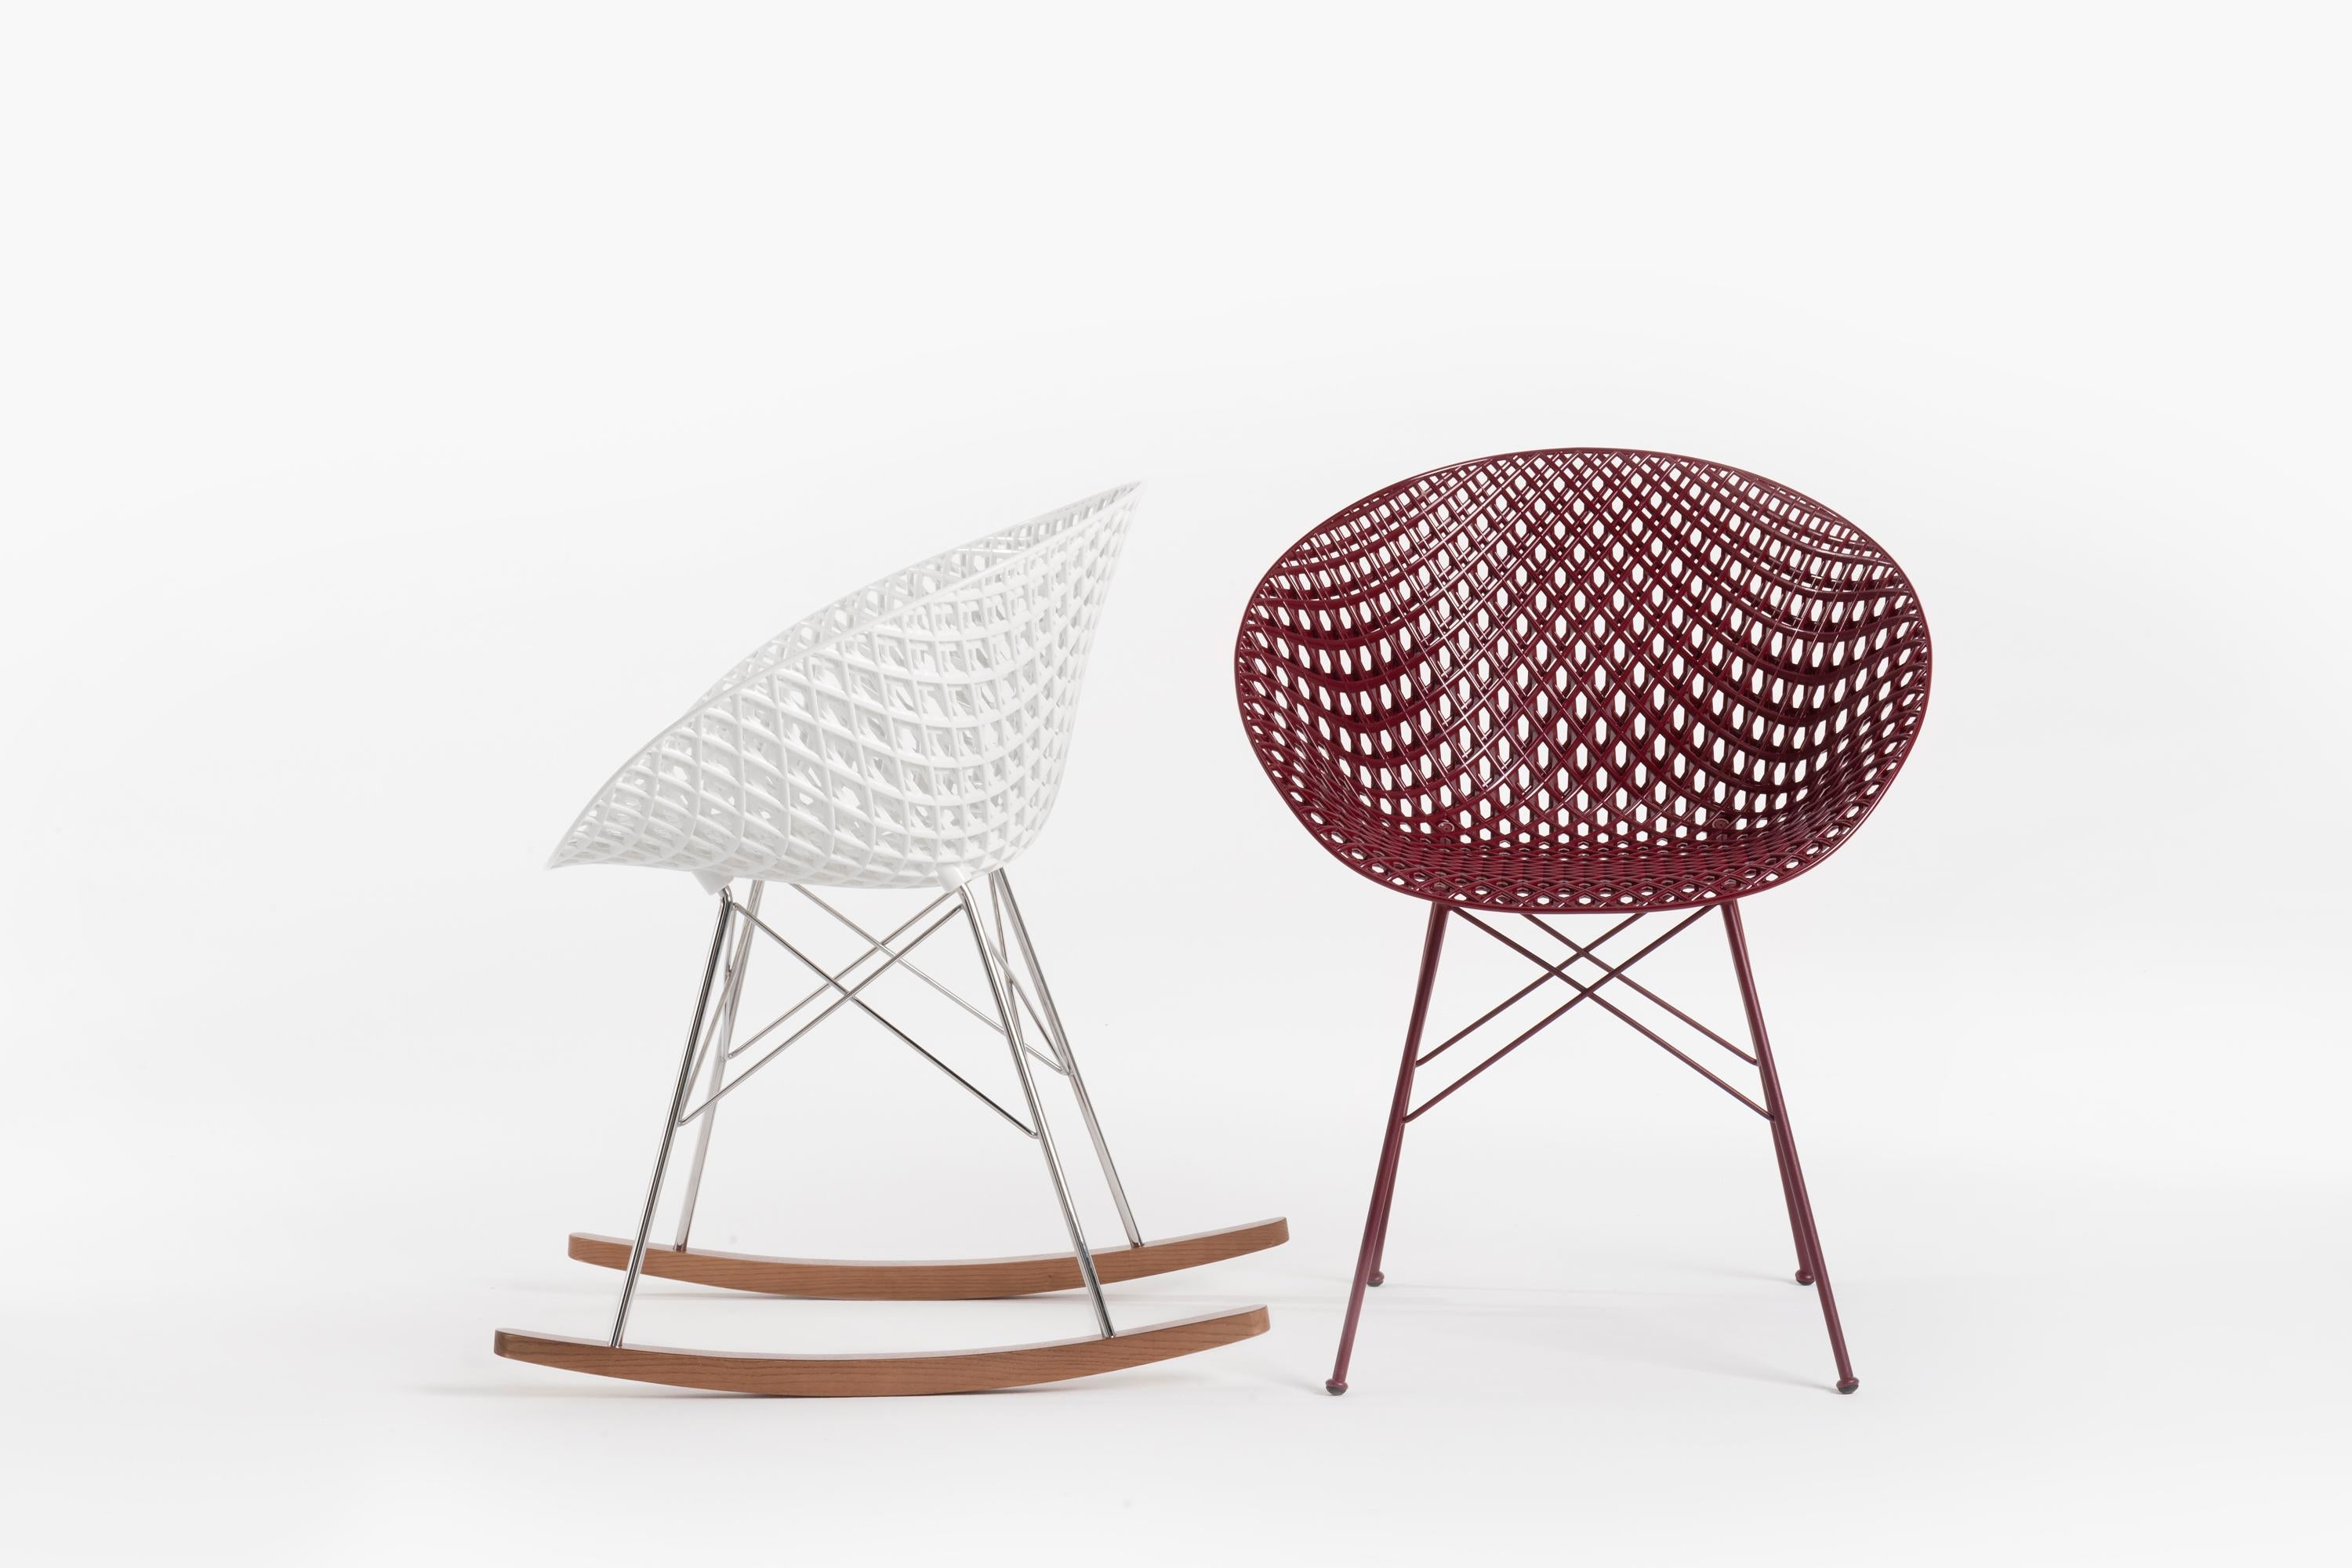 Contemporary Set of 2 Kartell Smatrik Outdoor Chair in Plum by Tokujin Yoshioka For Sale